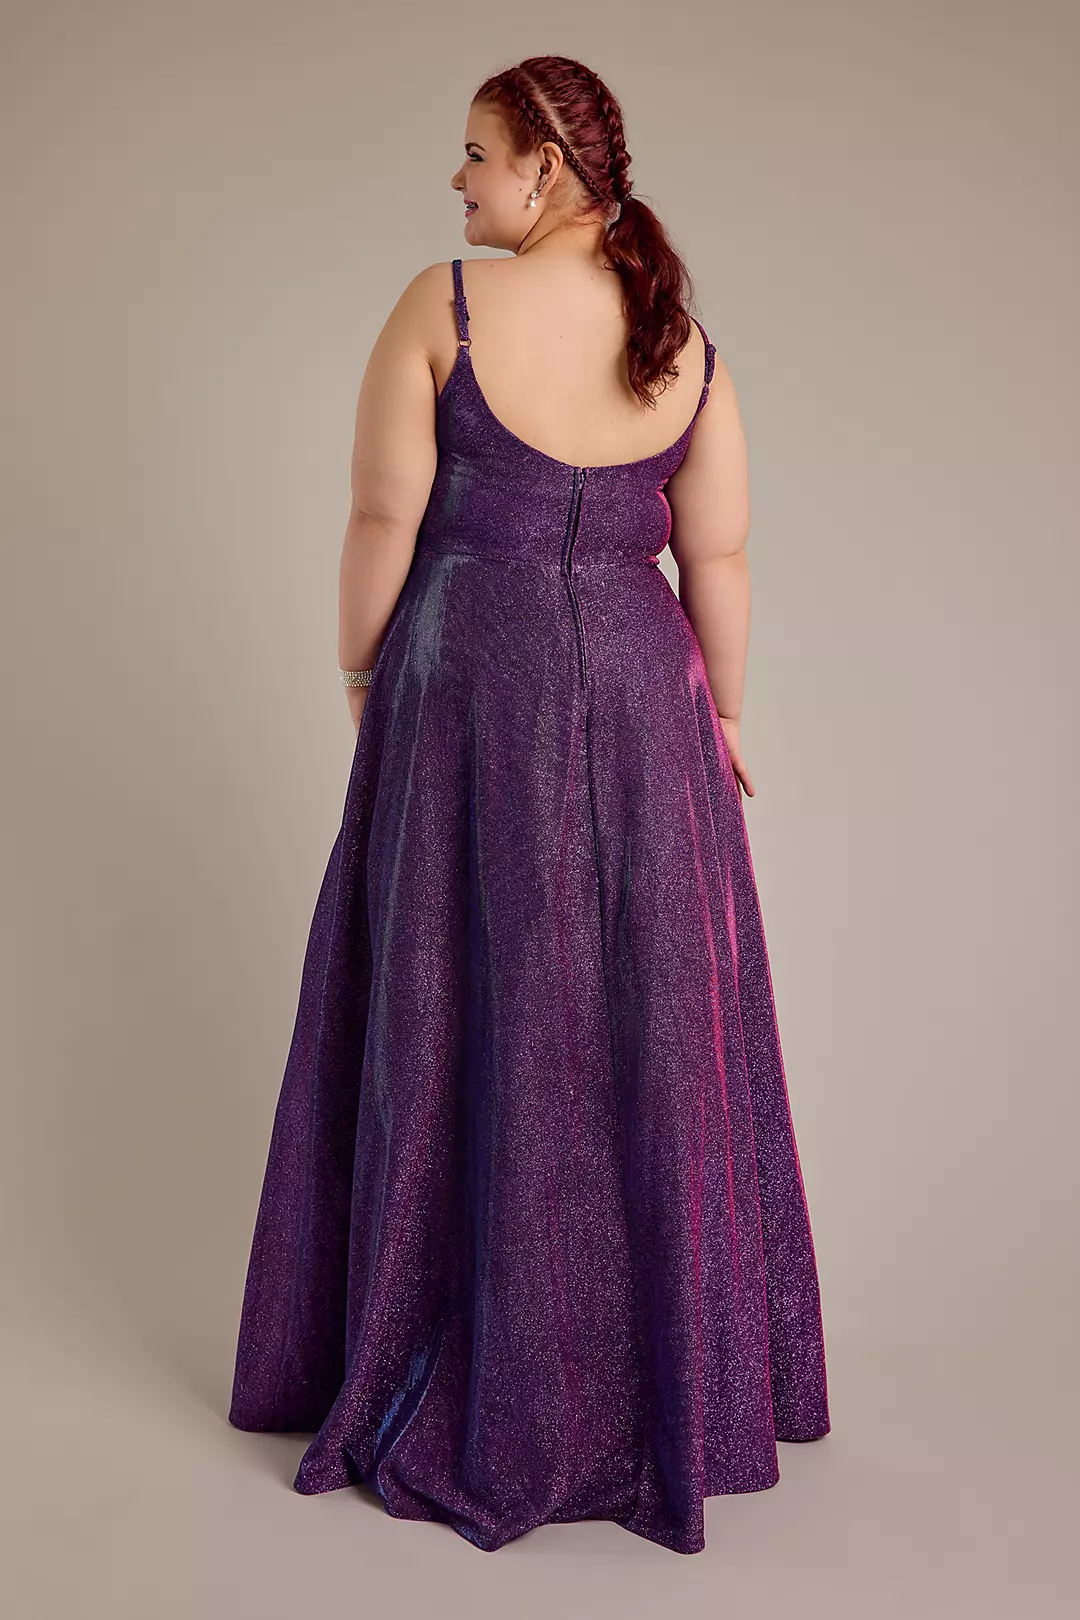 Glitter Ball Gown with Bodice Cutout Image 2